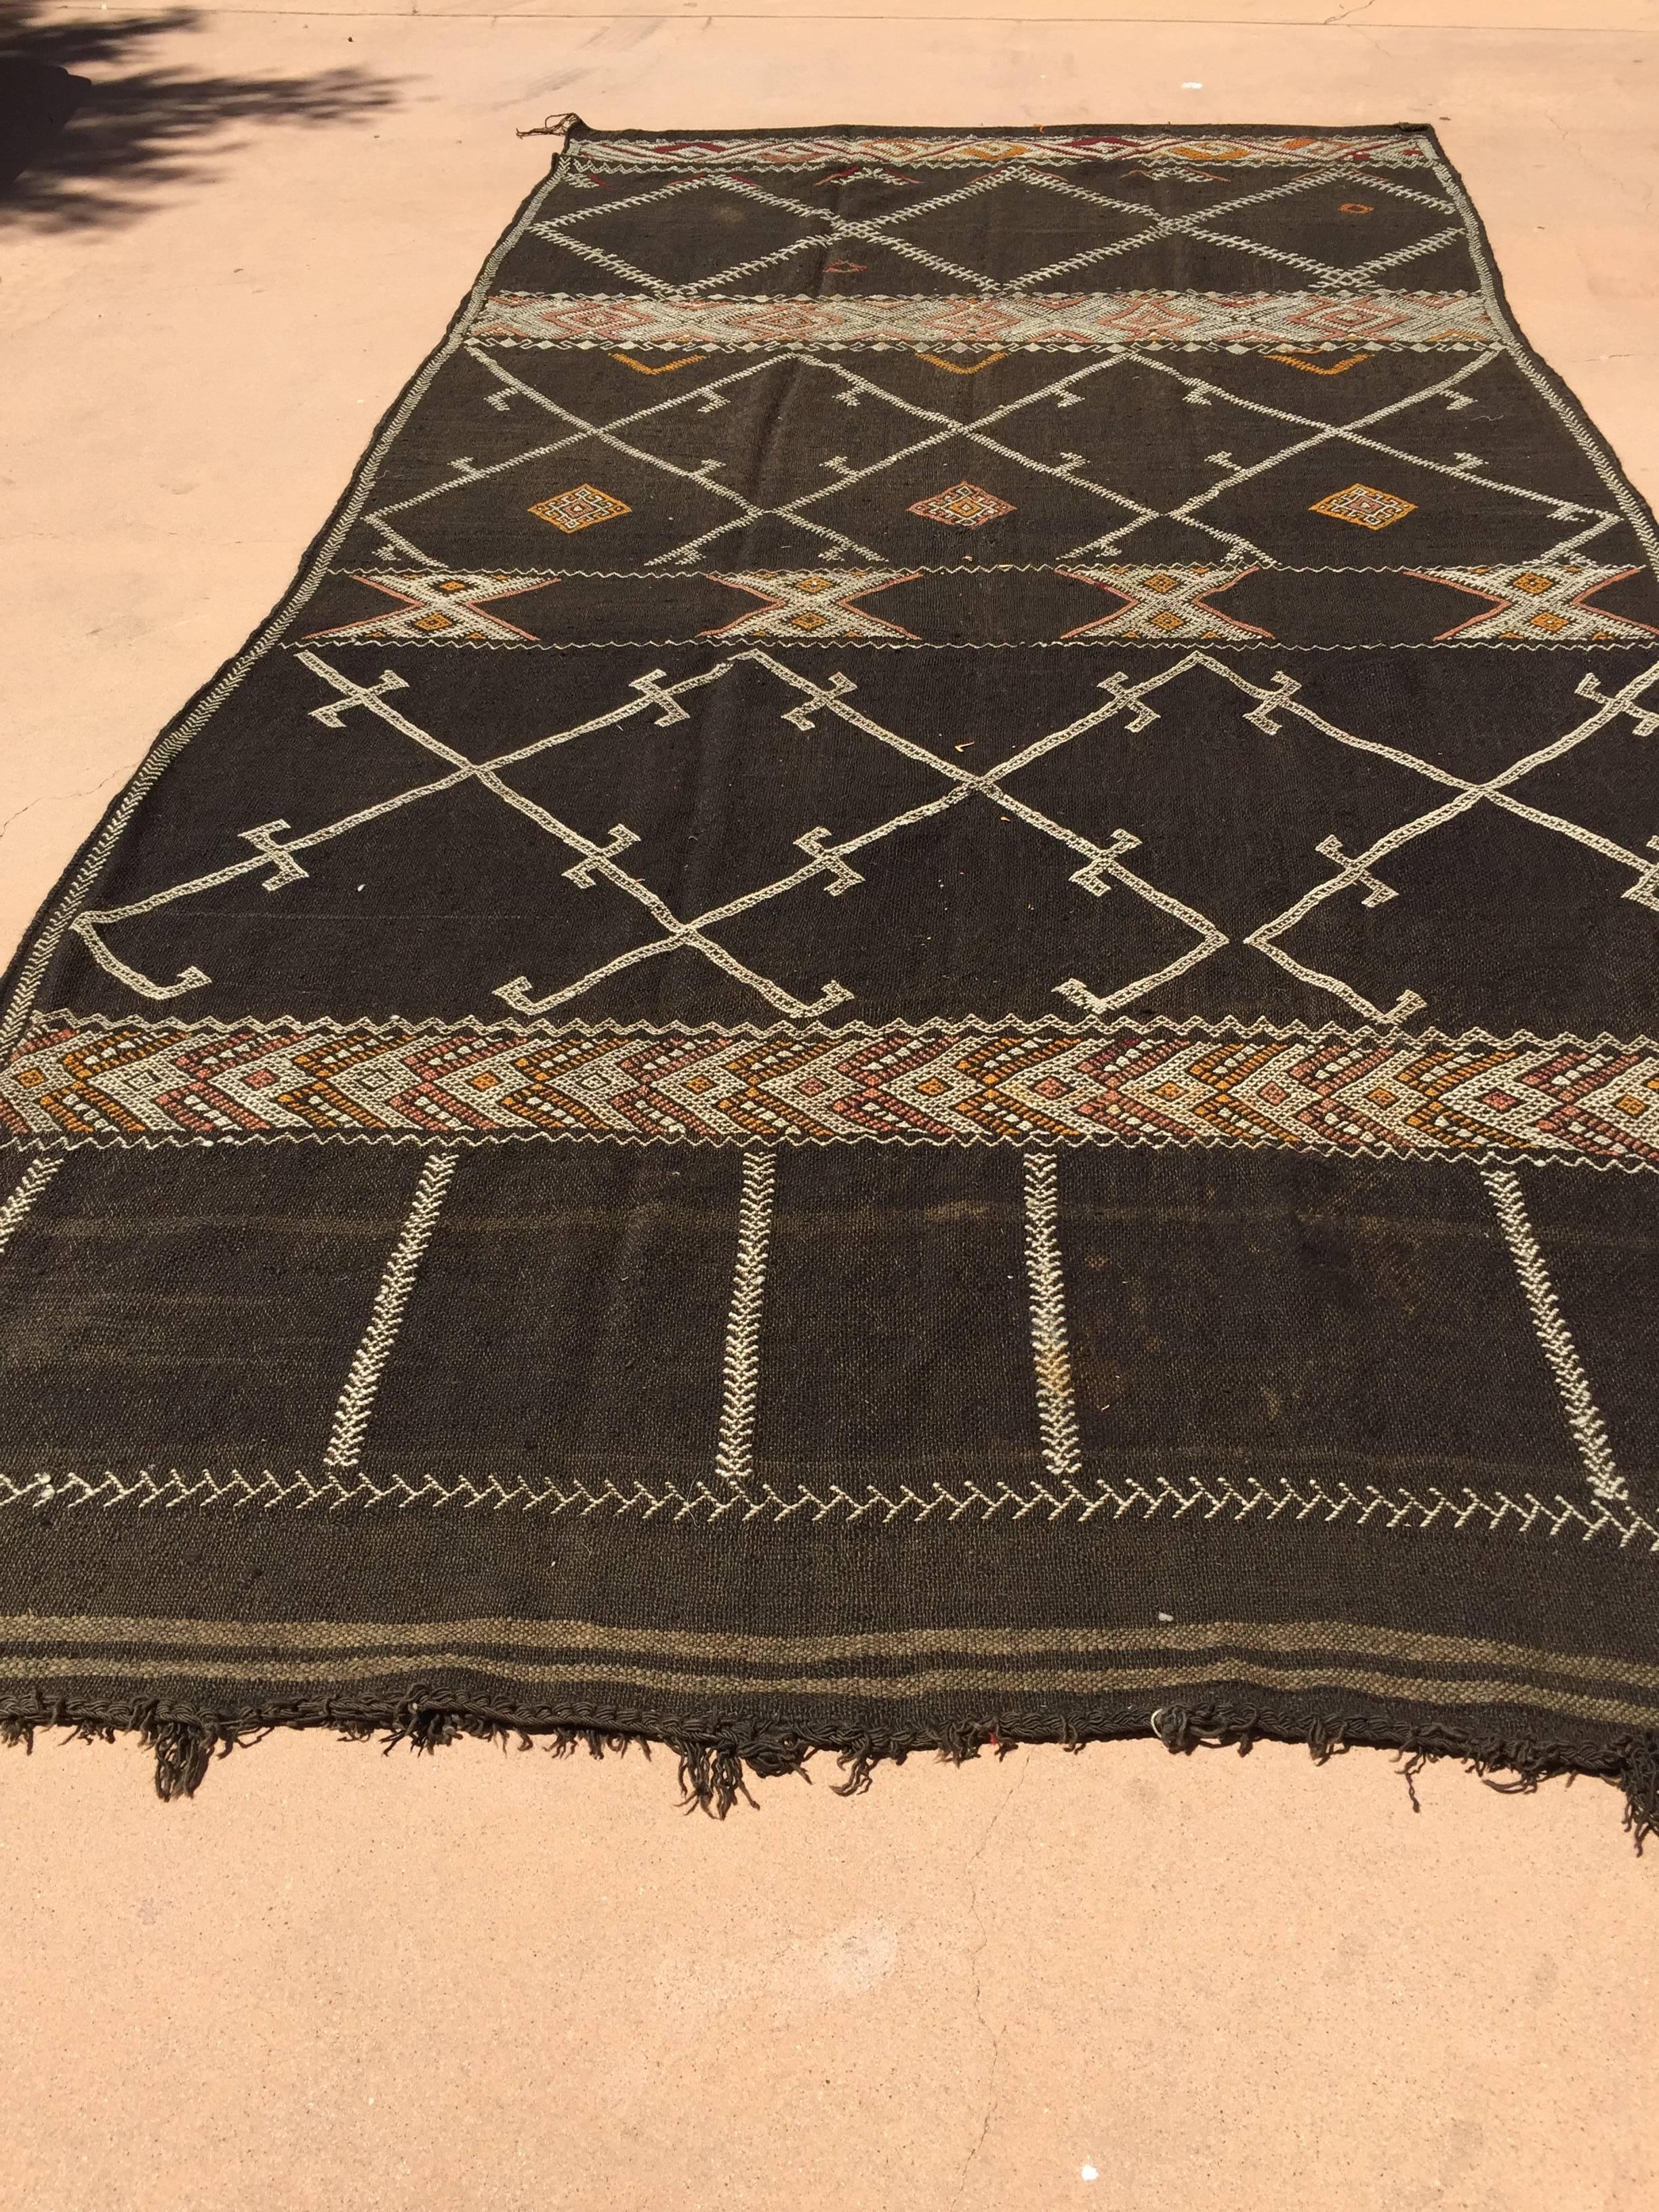 Vintage Moroccan African Nomadic Tribal rug.
Vintage Mid-Century Moroccan Nomadic rug, black camel hair with wool and cotton embroidered geometrical modernist designs in white and red colors.
Flat-weave Kilim, hand woven by the Berber women of